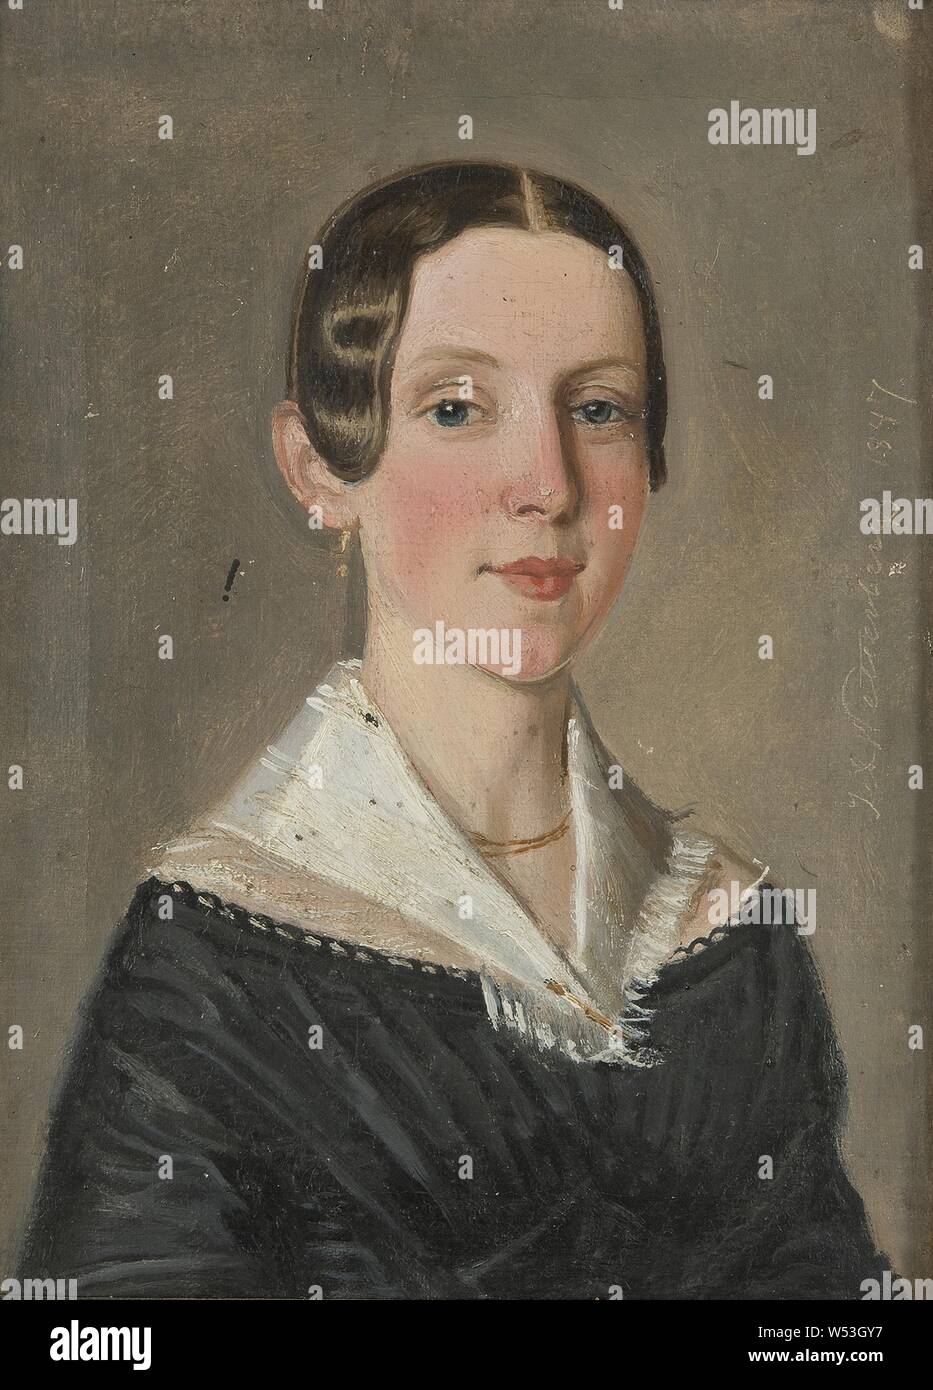 Alexis Wetterbergh, Elise Ljungman, g.m, color manufacturer and children's house director Signeul in Uddevalla, 1847, Oil on canvas, Height, 23.5 cm (9.2 inches), Width, 27.5 cm (10.8 inches), Mrs. Signeul Uddevalla, a.t, tensioner frame, left side, pencil, Mrs Elise Signeul b. Ljungman Uddevalla, b. Ljungman, Target by J A Westerberg 1847, frame, right side, bottom, ball point, Signing, I, J?, A Wetterbergh 1847, right side carved in wet color layer Stock Photo